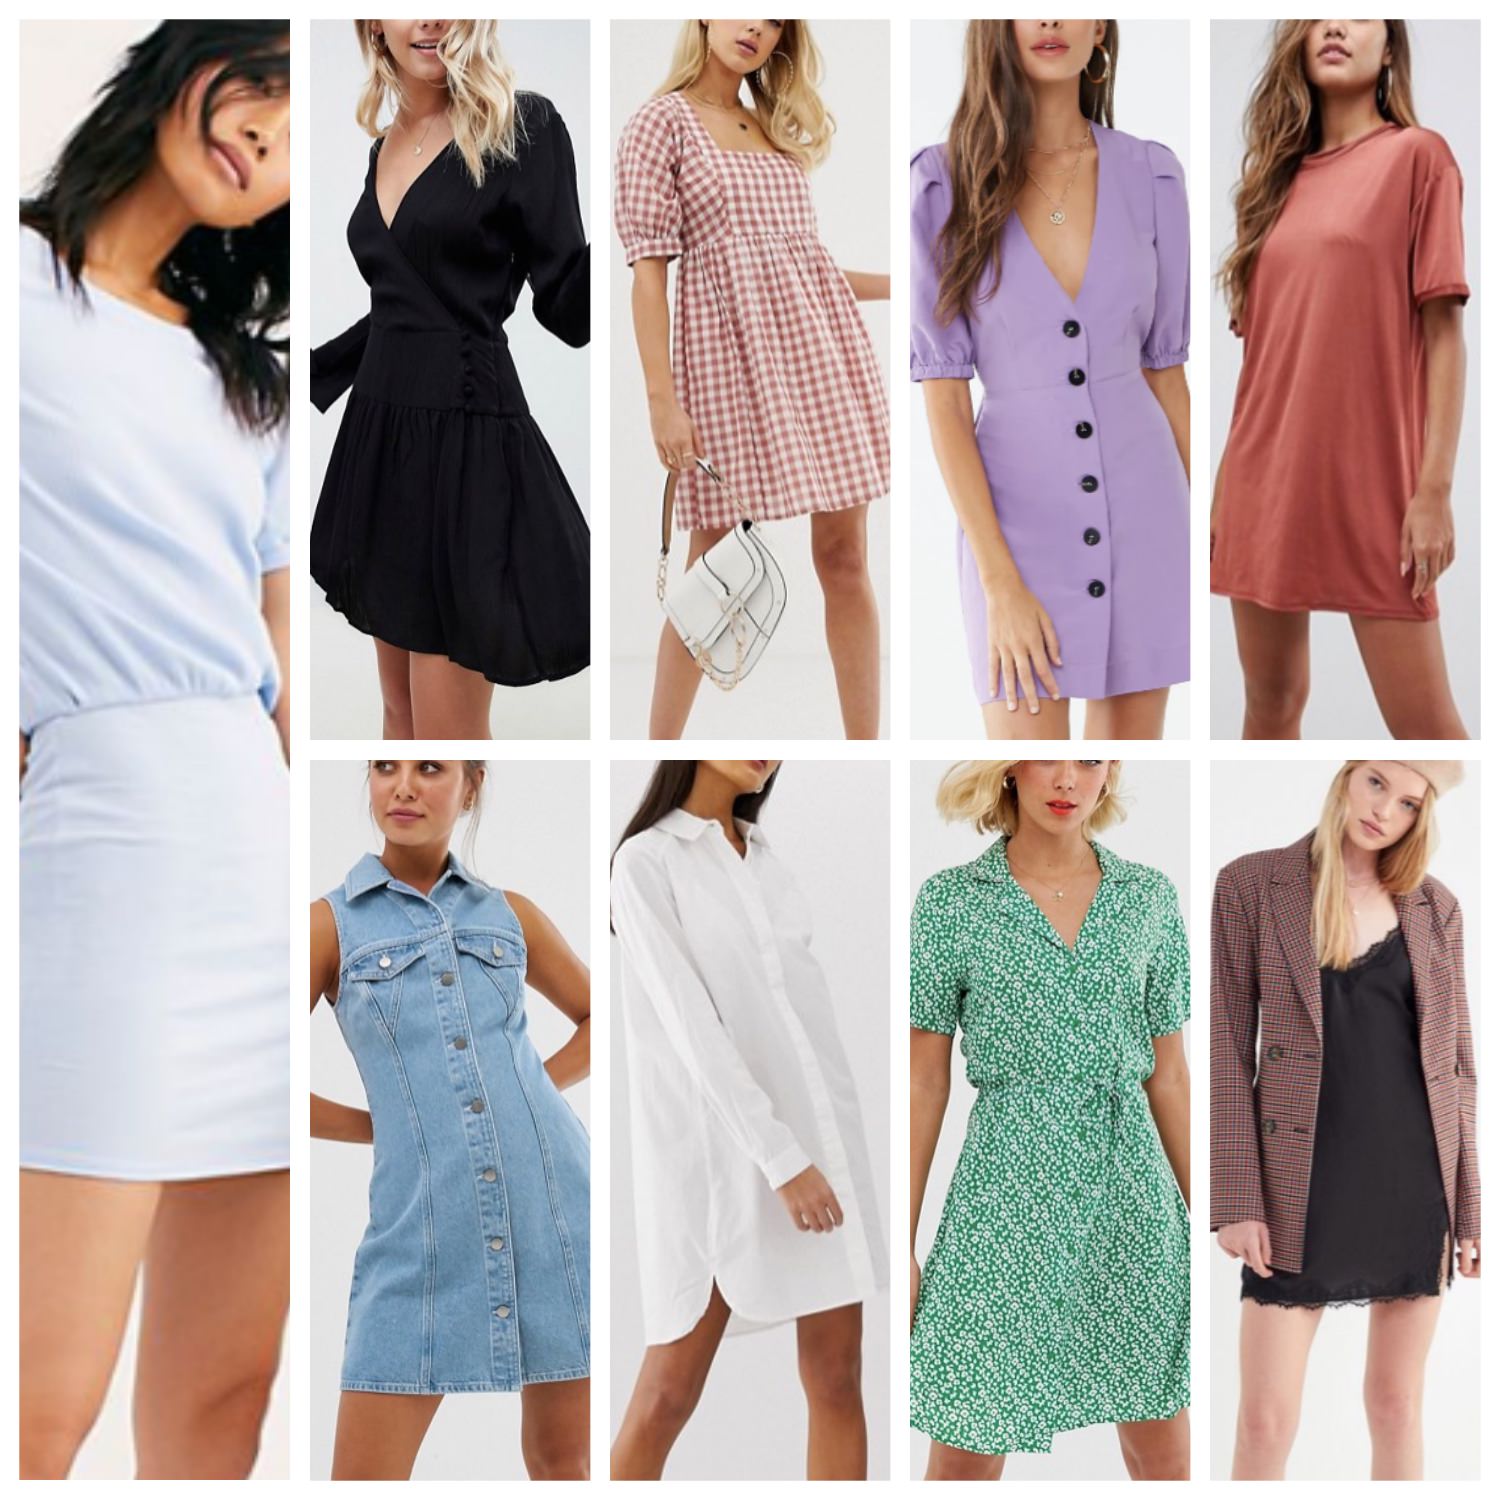 Short Dresses Under $50 | Truffles and Trends